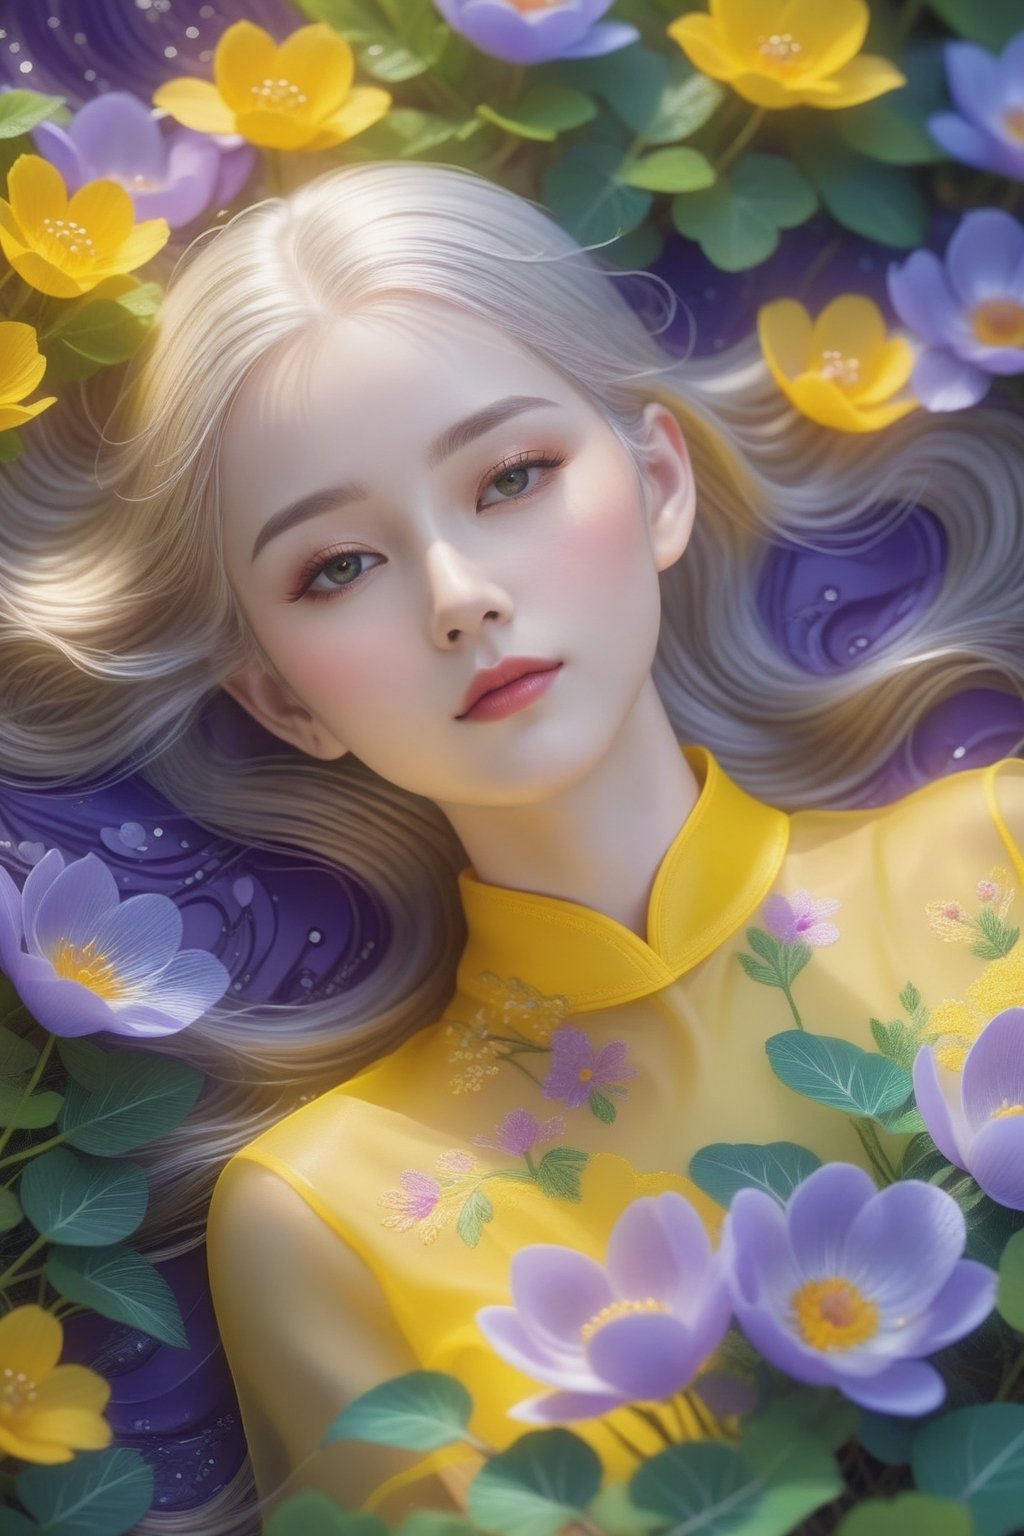 1 girl, upper body close-up, white hair, flowing hair, hazy beauty, extremely beautiful facial features, yellow embroidered dress, hair clip on the head, lying in the bushes, purple flowers, (spring, rainy days, terraces, mountains), simple vector art, contemporary Chinese art, soft light, layered form, seen from above,minimalist hologram,glow